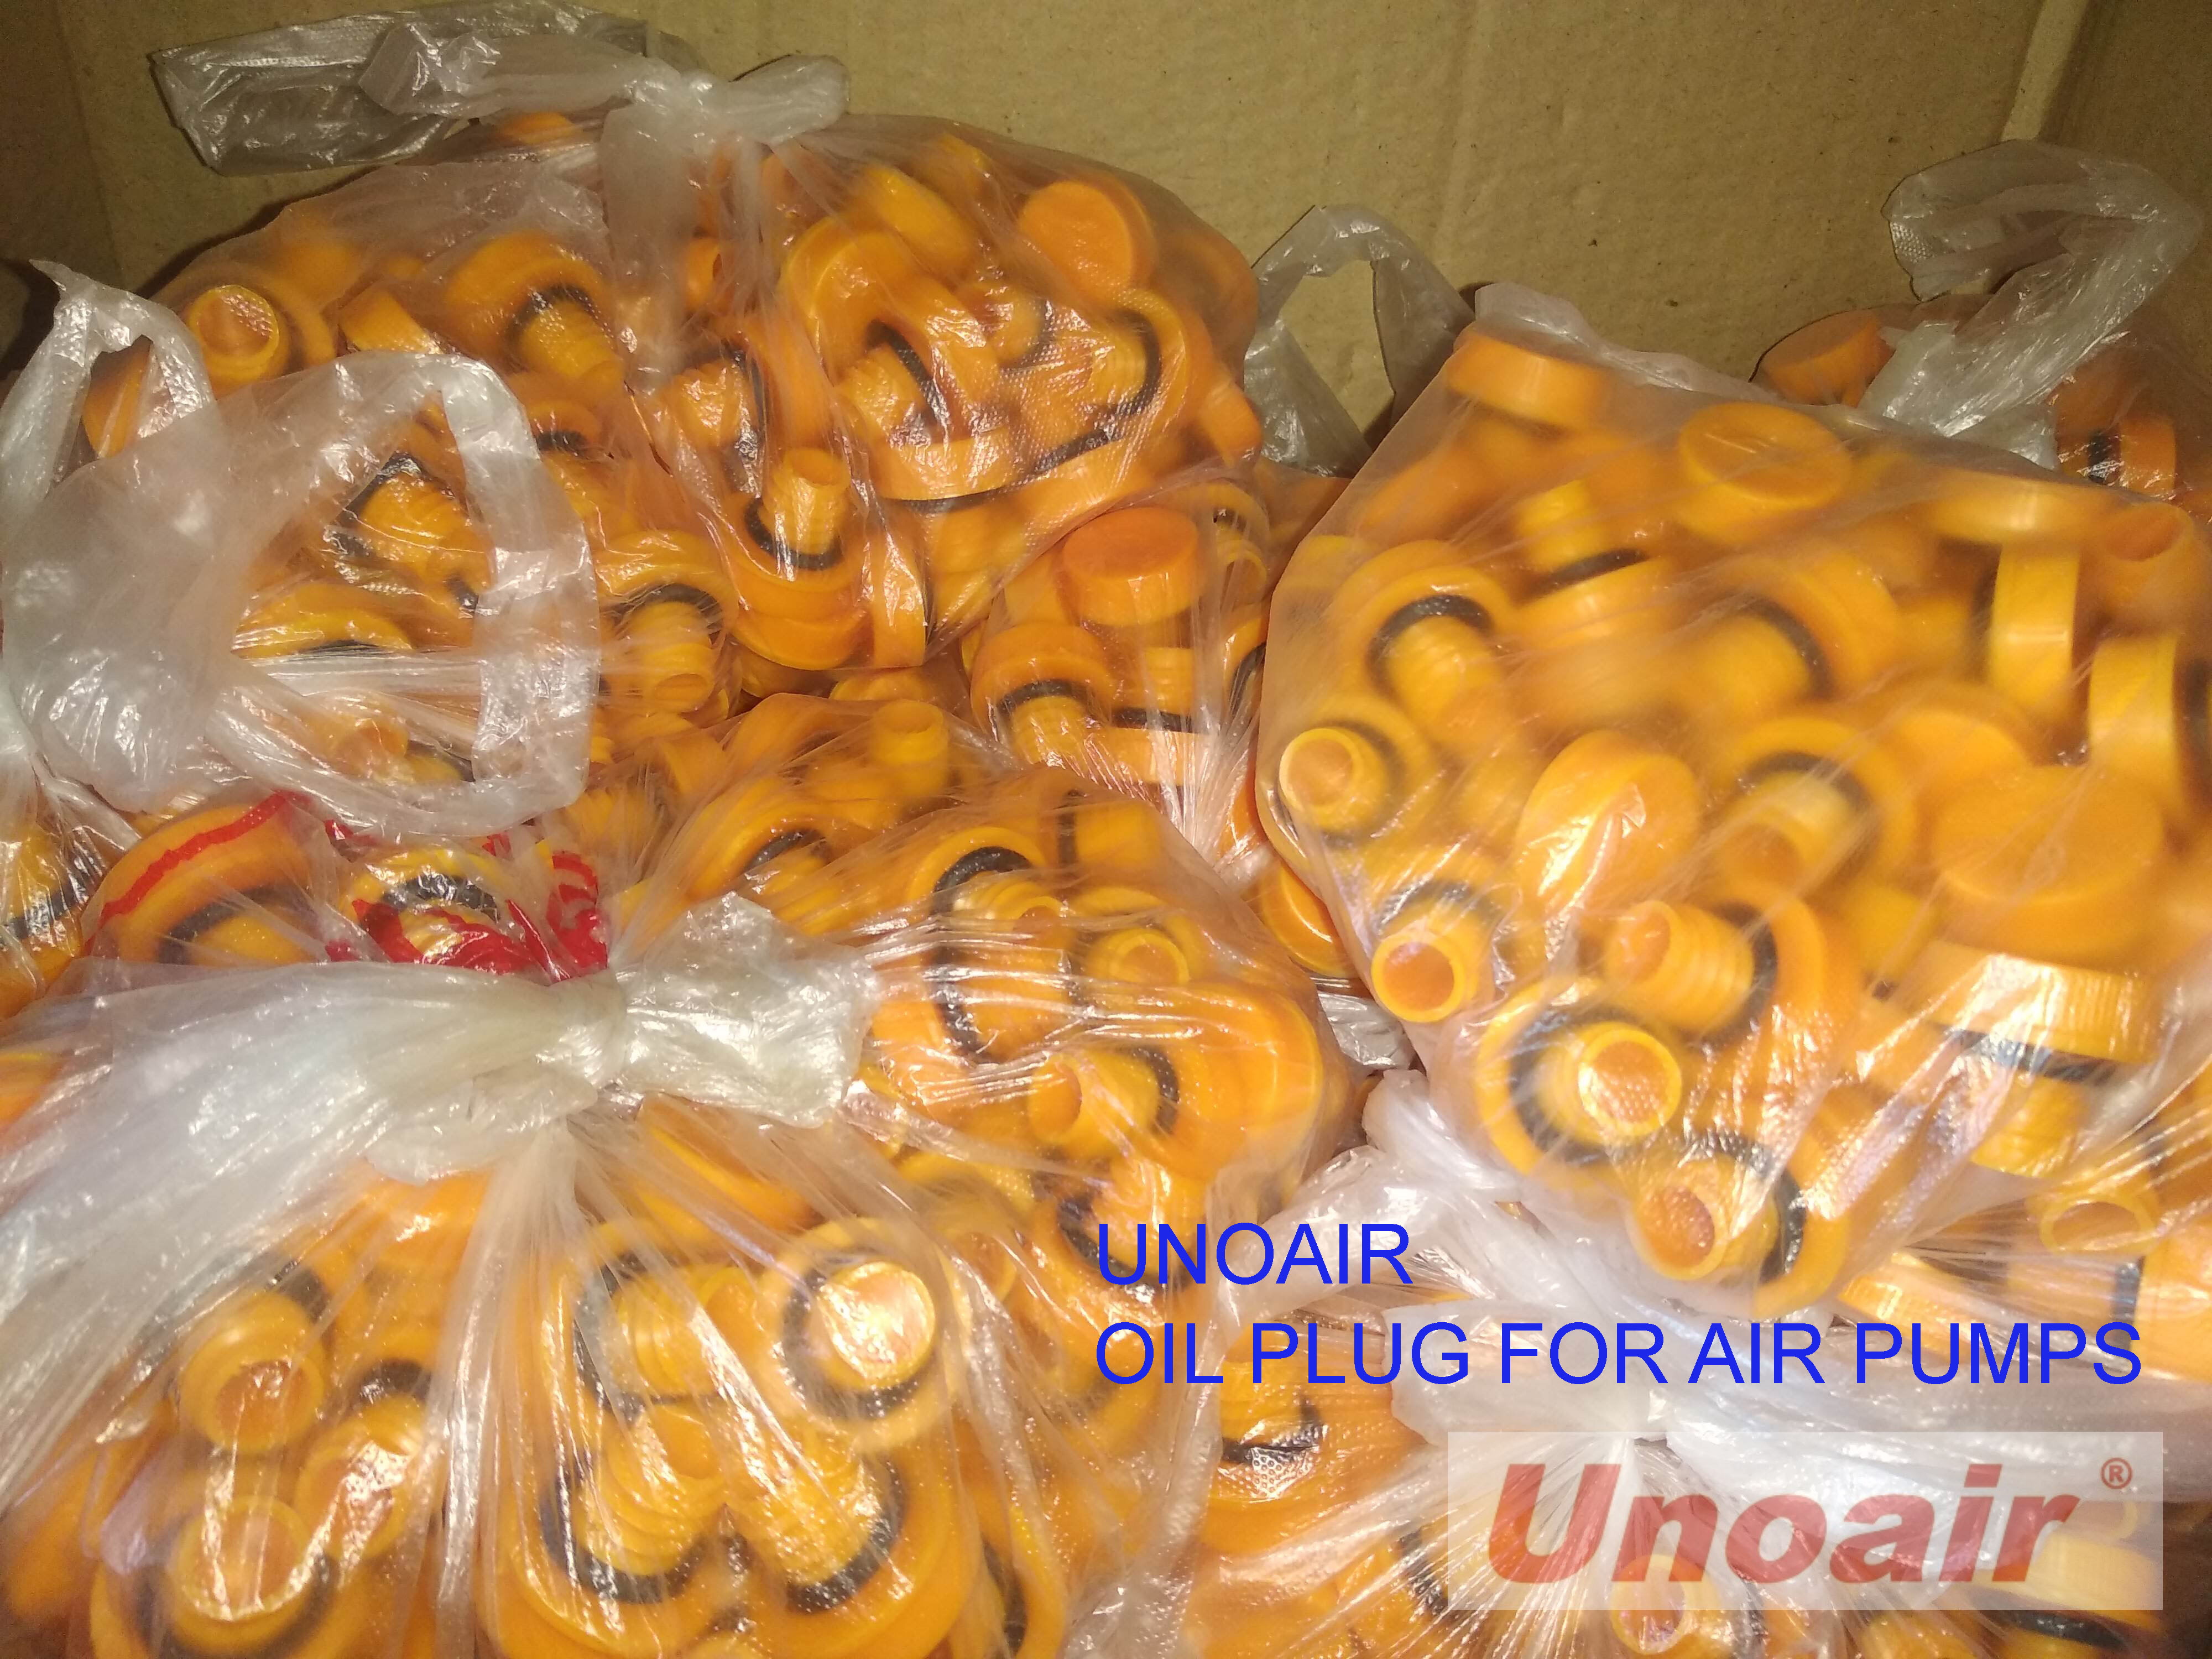  UNOAIR Weekly Update 10/14/2022 COMPRESSOR, AIR TOOLS, HANDTOOLS, ABRASIVE MATERIAL AND MORE